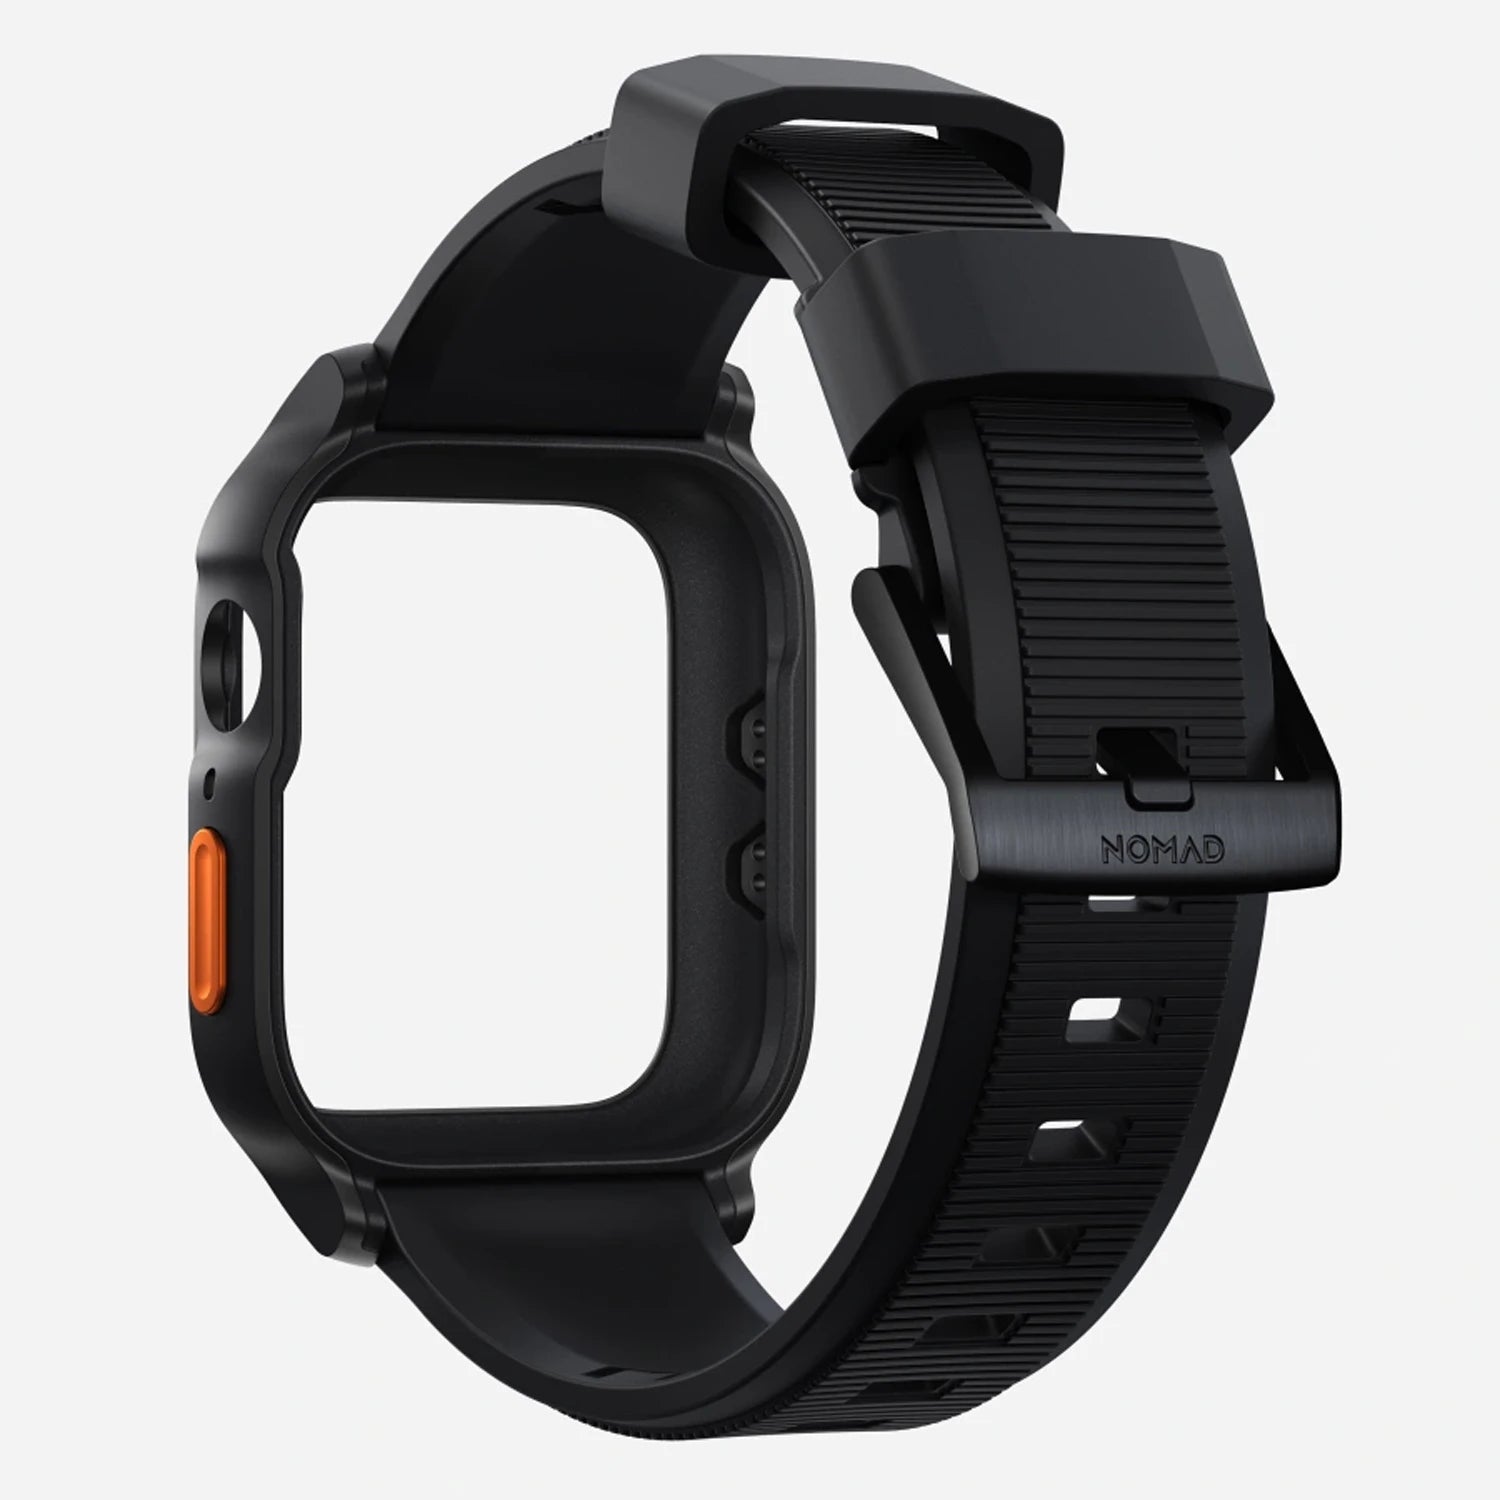 NOMAD Rugged Protective Wristband Case for Apple Watch 45mm, Case with Strap Band for Apple Watch